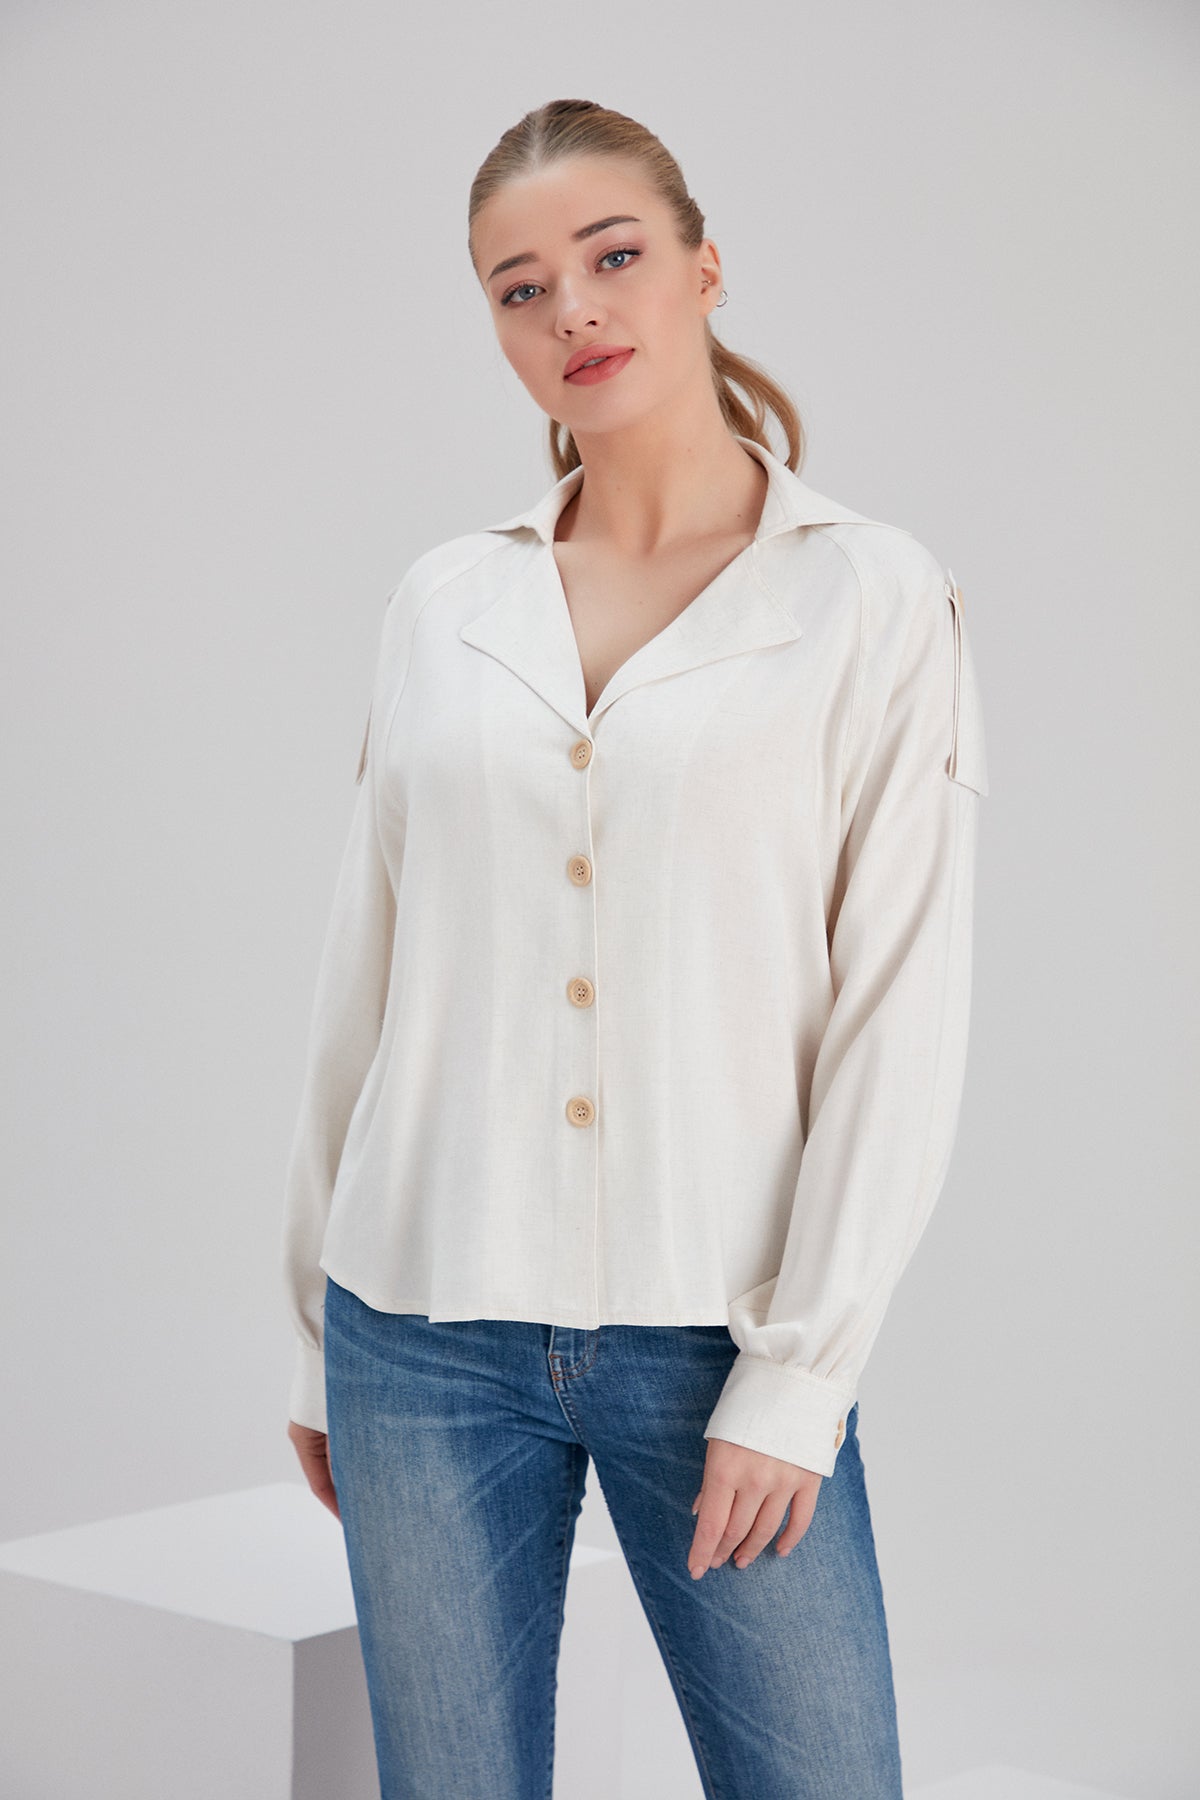 sustainable linen viscose mix fabric ivory color shirt top with recycled buttons 